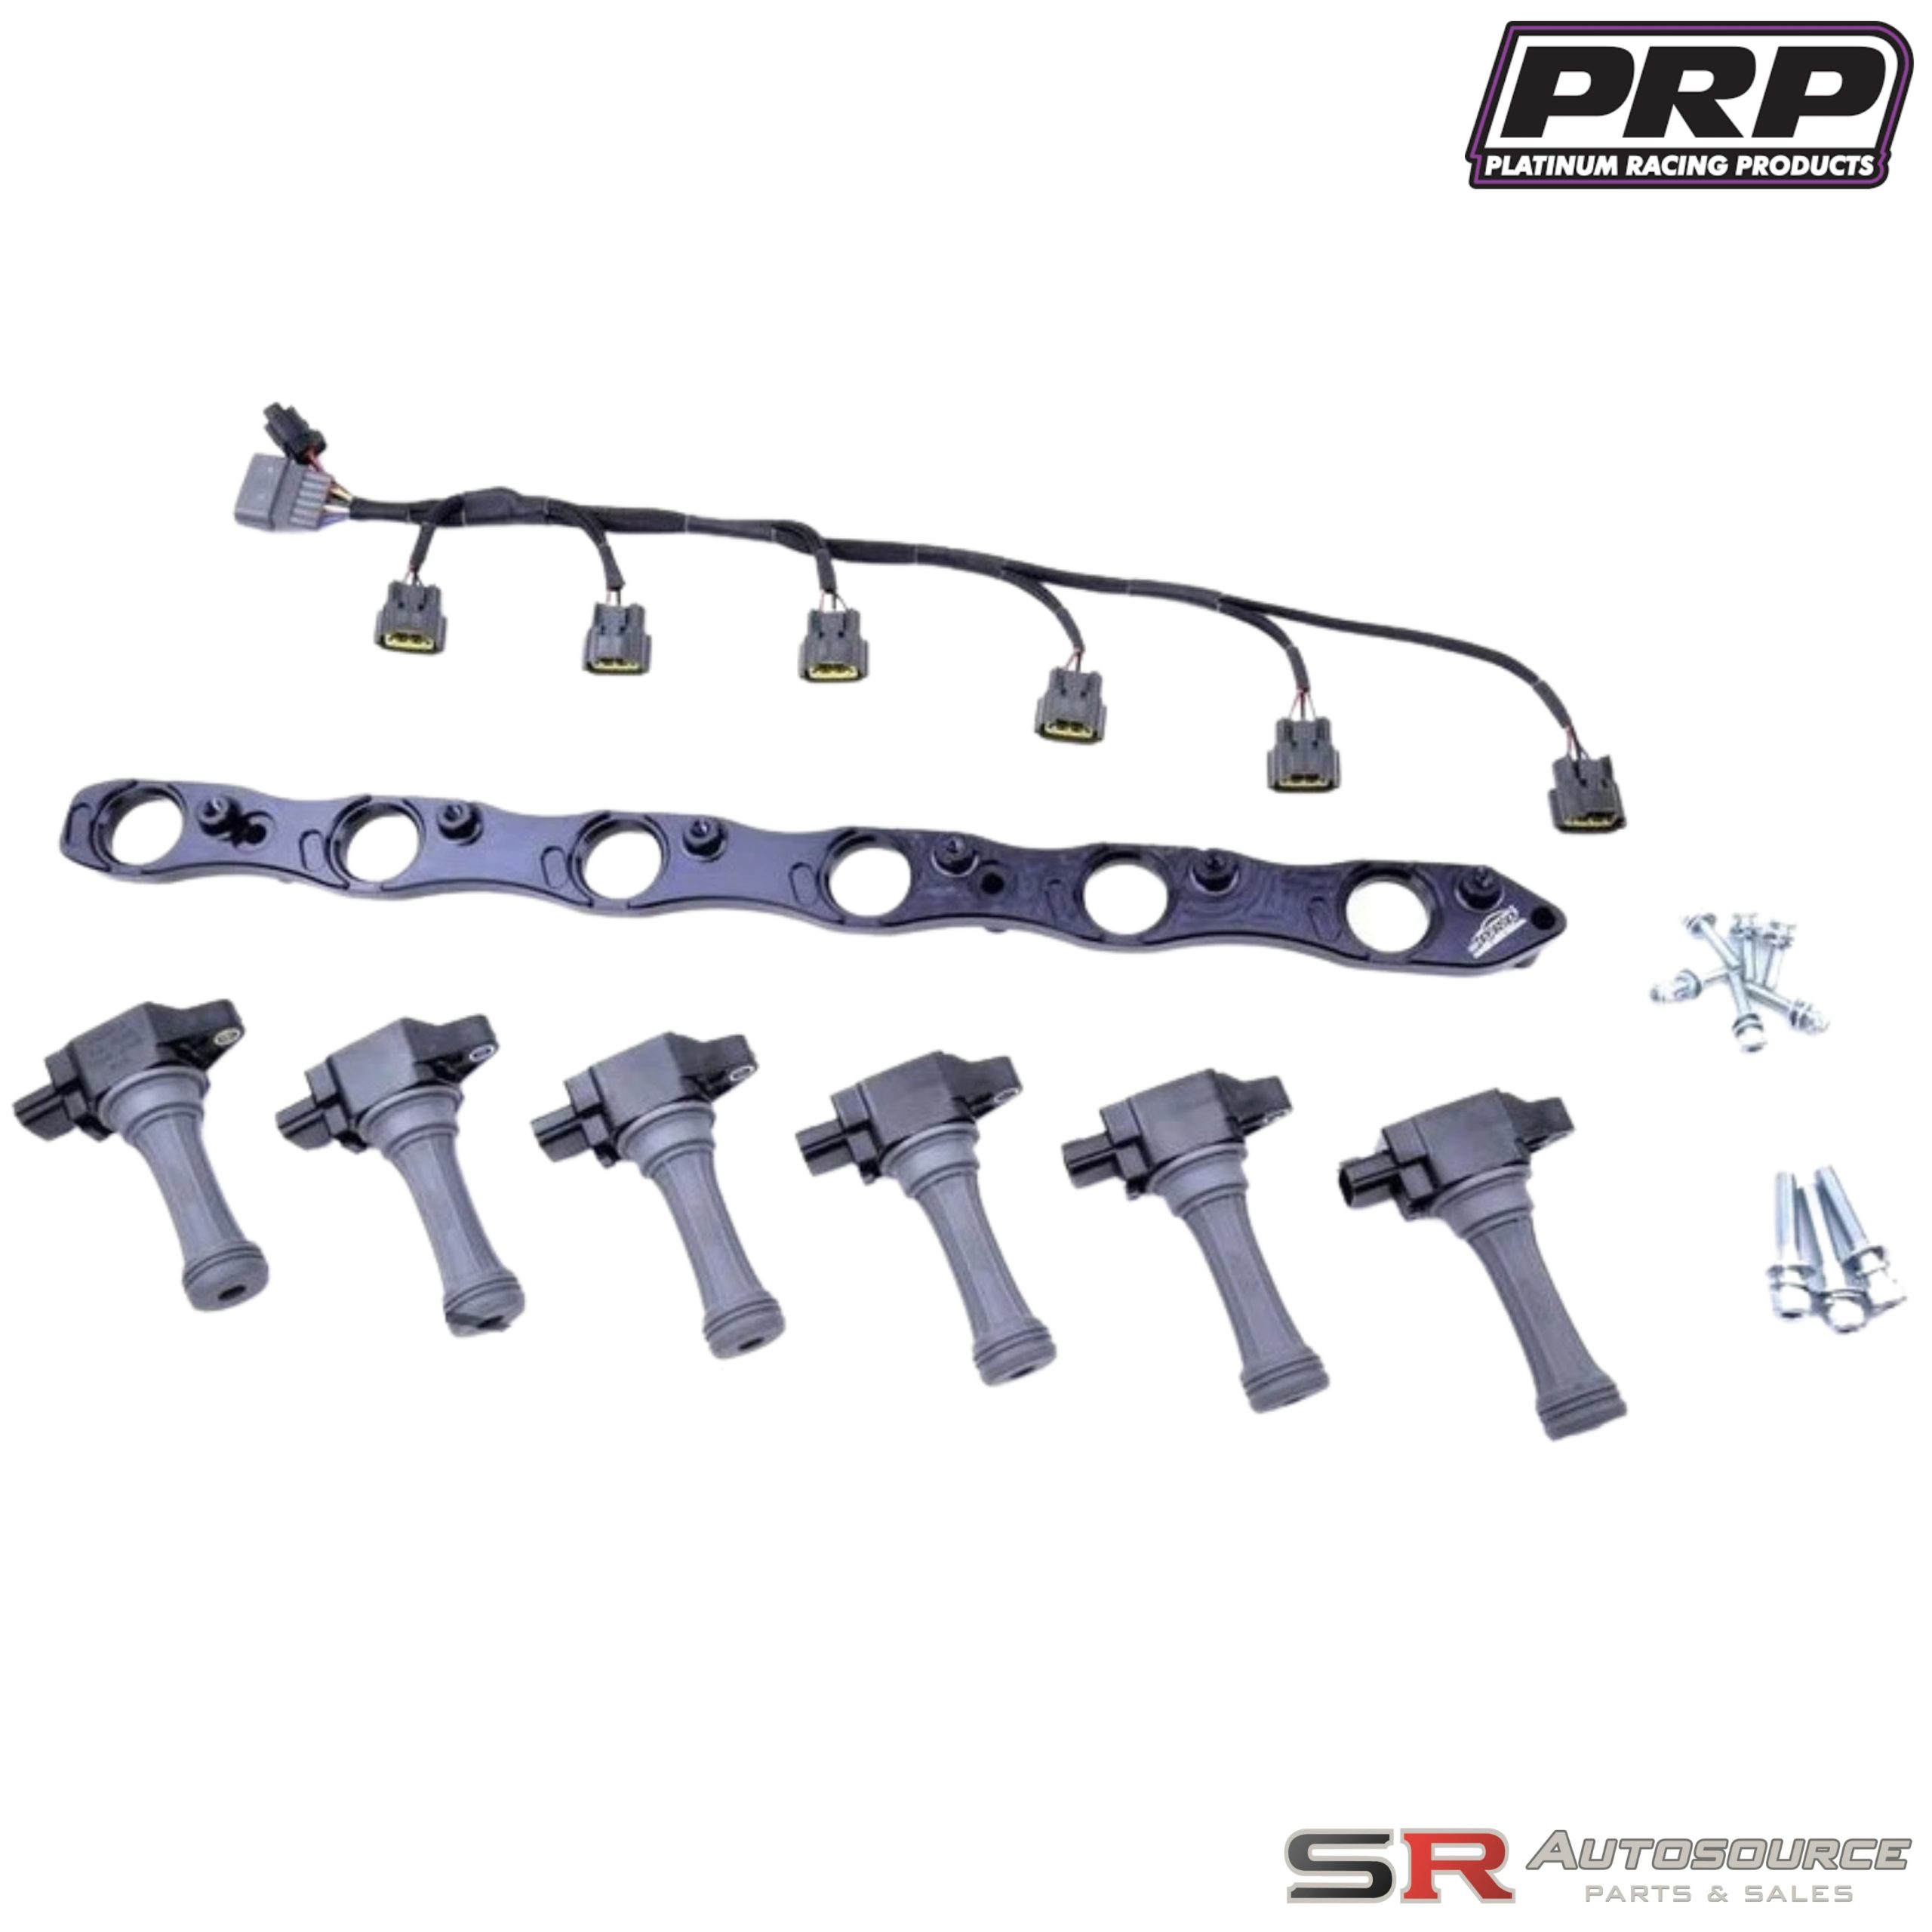 Special Offer – PRP Platinum Racing Products – RB VR38 Complete Coil Kit – R33 GTR (S1)